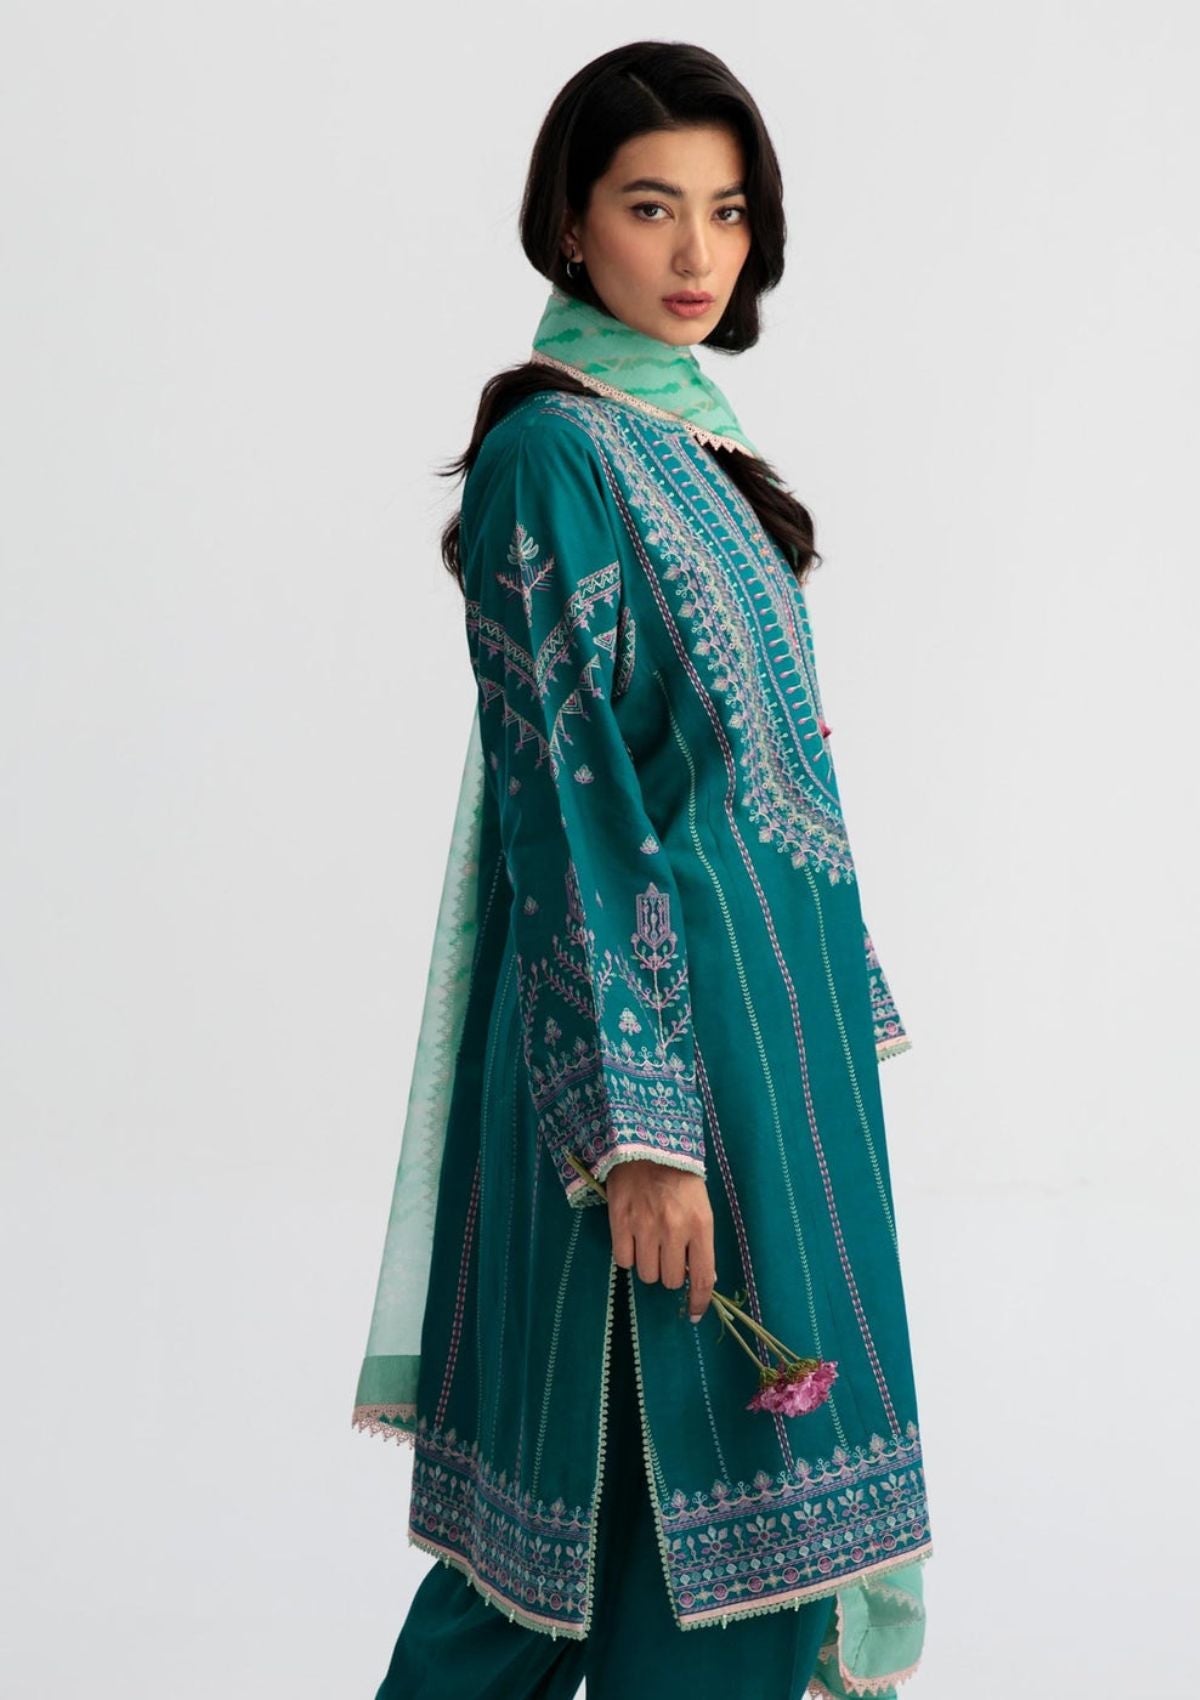 Lawn Collection - Zara ShahJahan - Coco - ZSC#4 A available at Saleem Fabrics Traditions